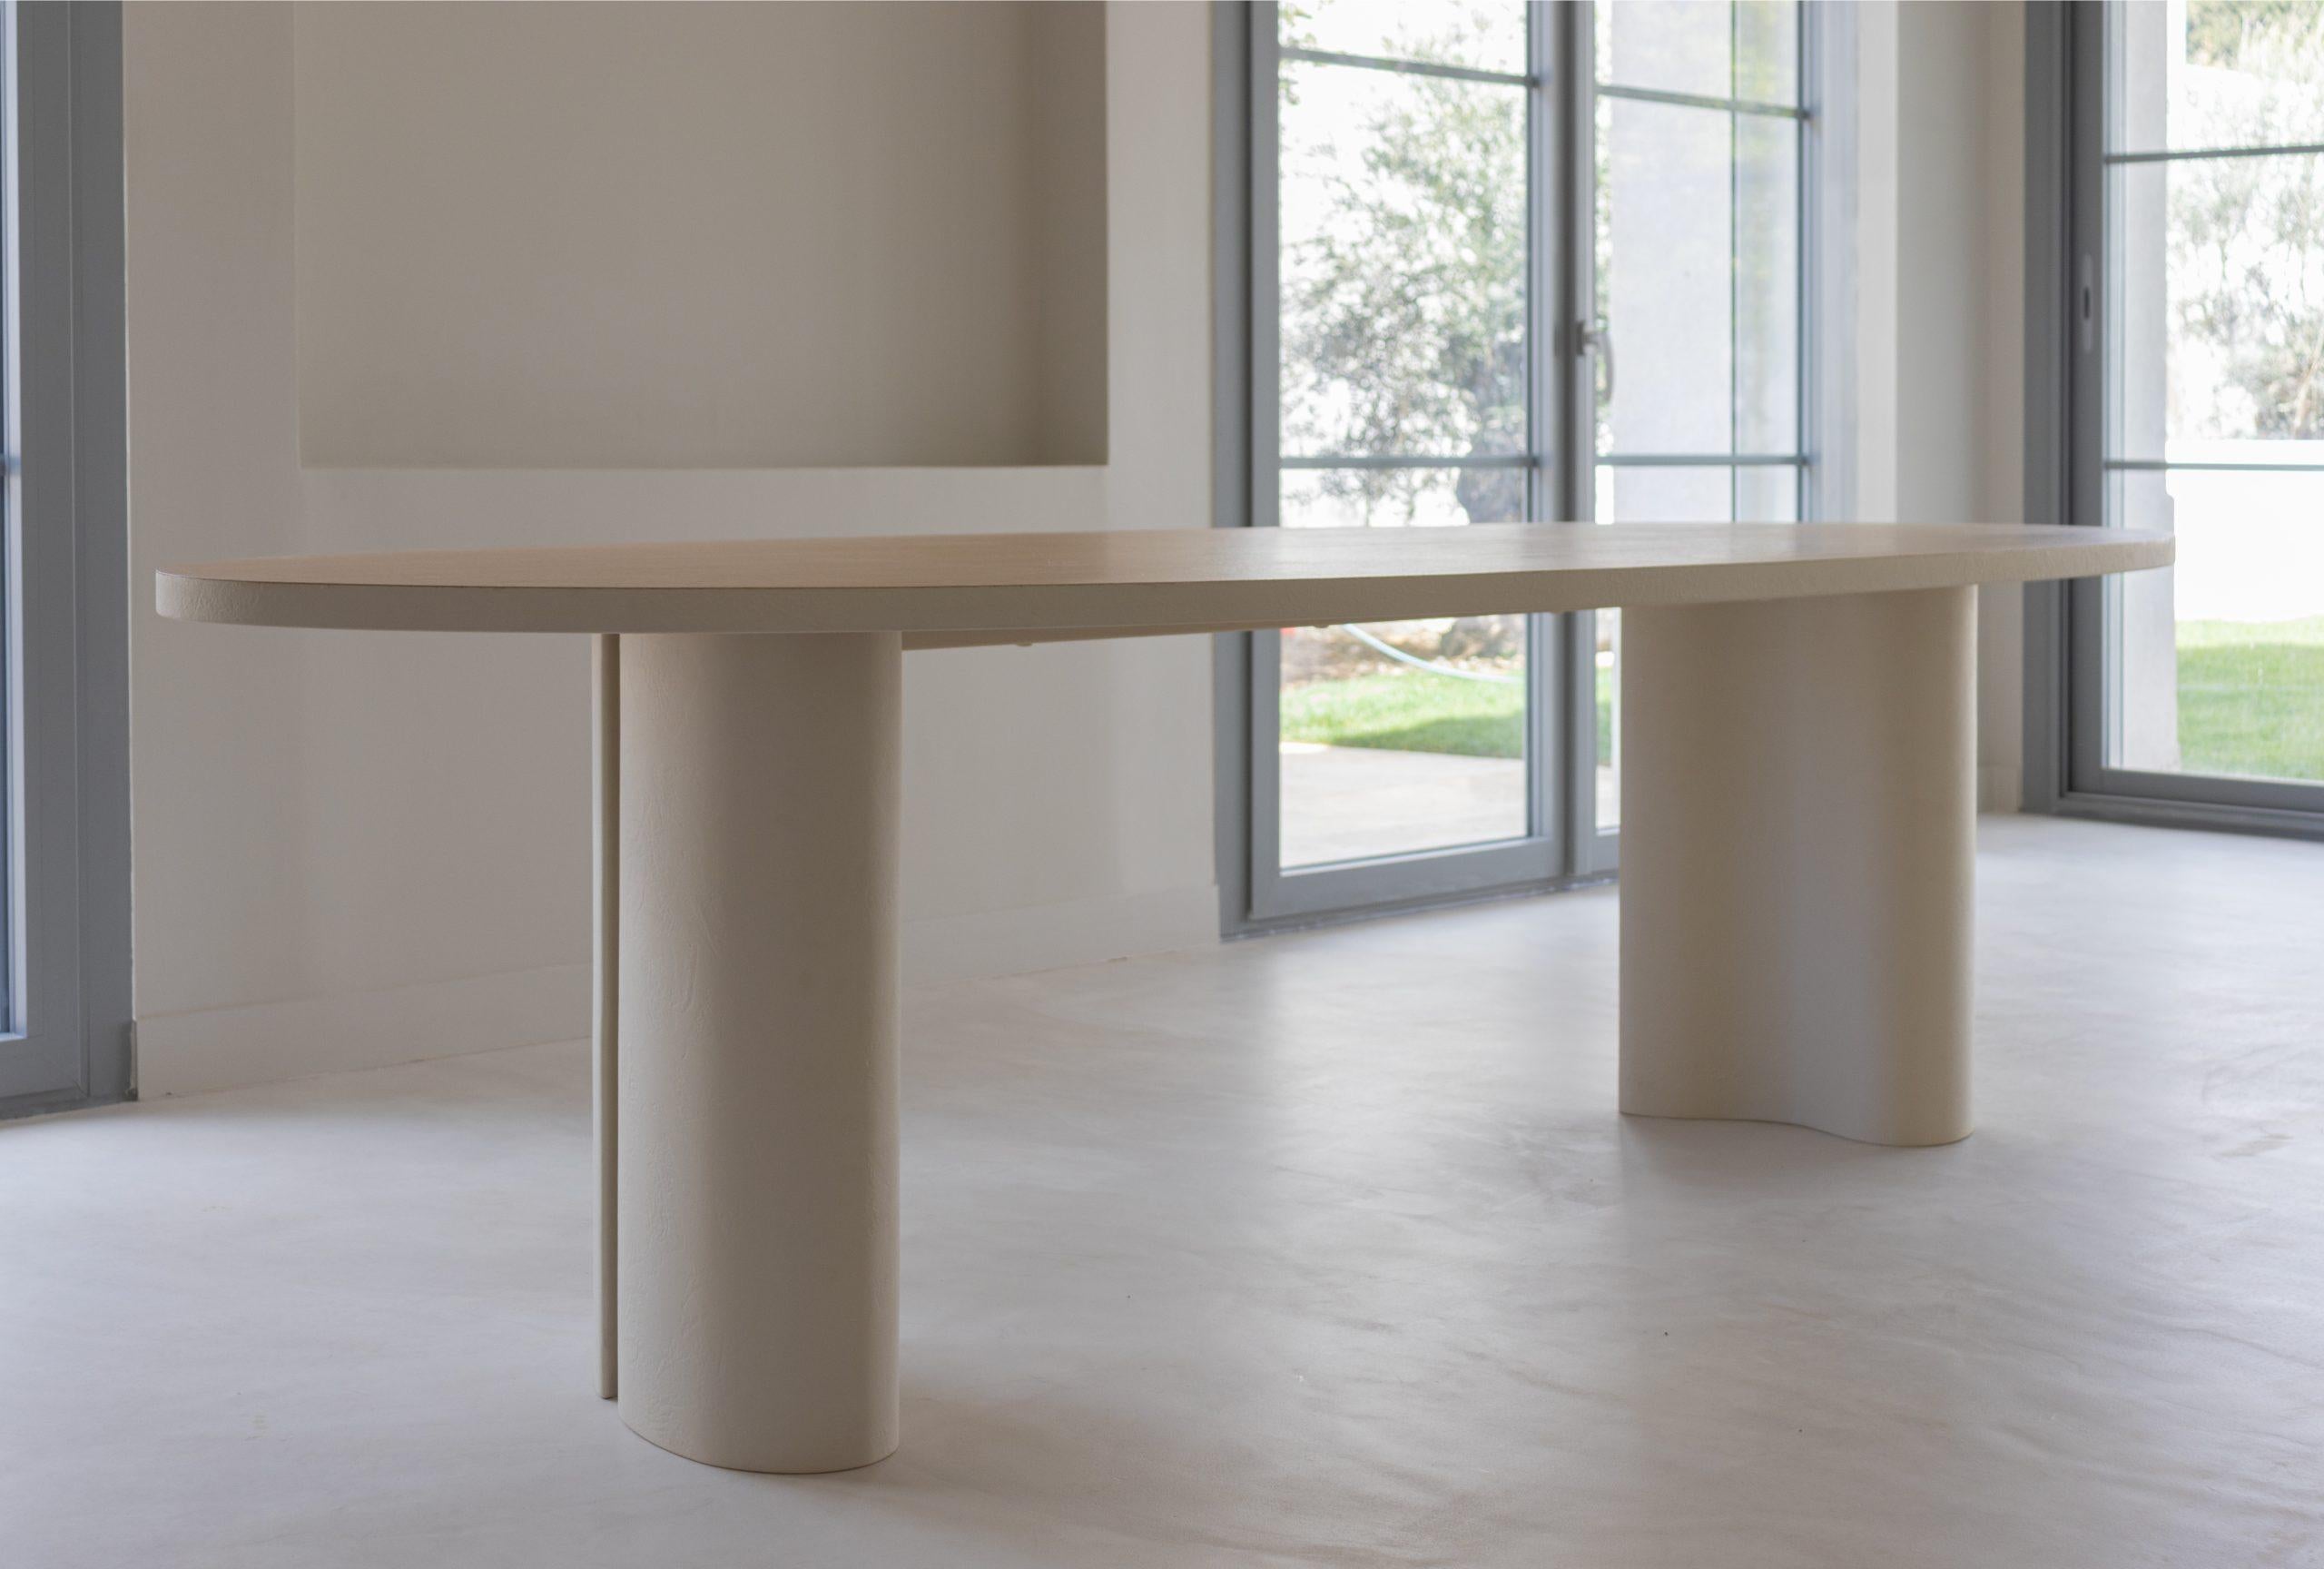 Unique Louka Dining Table Signed by Gigi Design
Dimensions: D280 x W90 x H74 cm
Materials: Natural oak veneer
 
Inspired by Greece, the table Louka is generous and pure.
Its large asymmetrical top of is veneered in natural oak.
We realized a